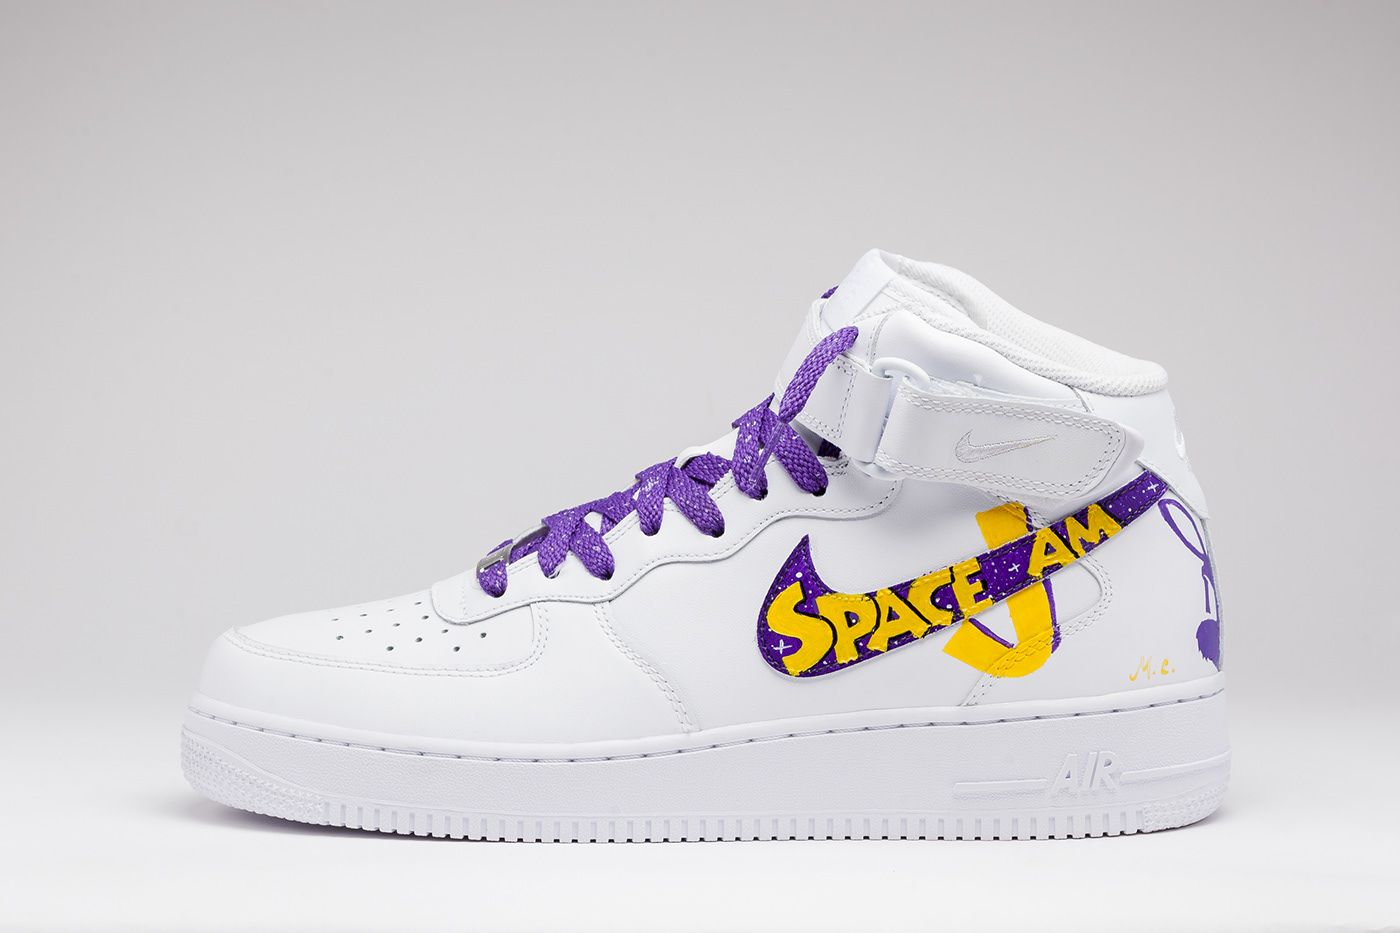 Space Jam x Nike Air Force 1 on Student Show